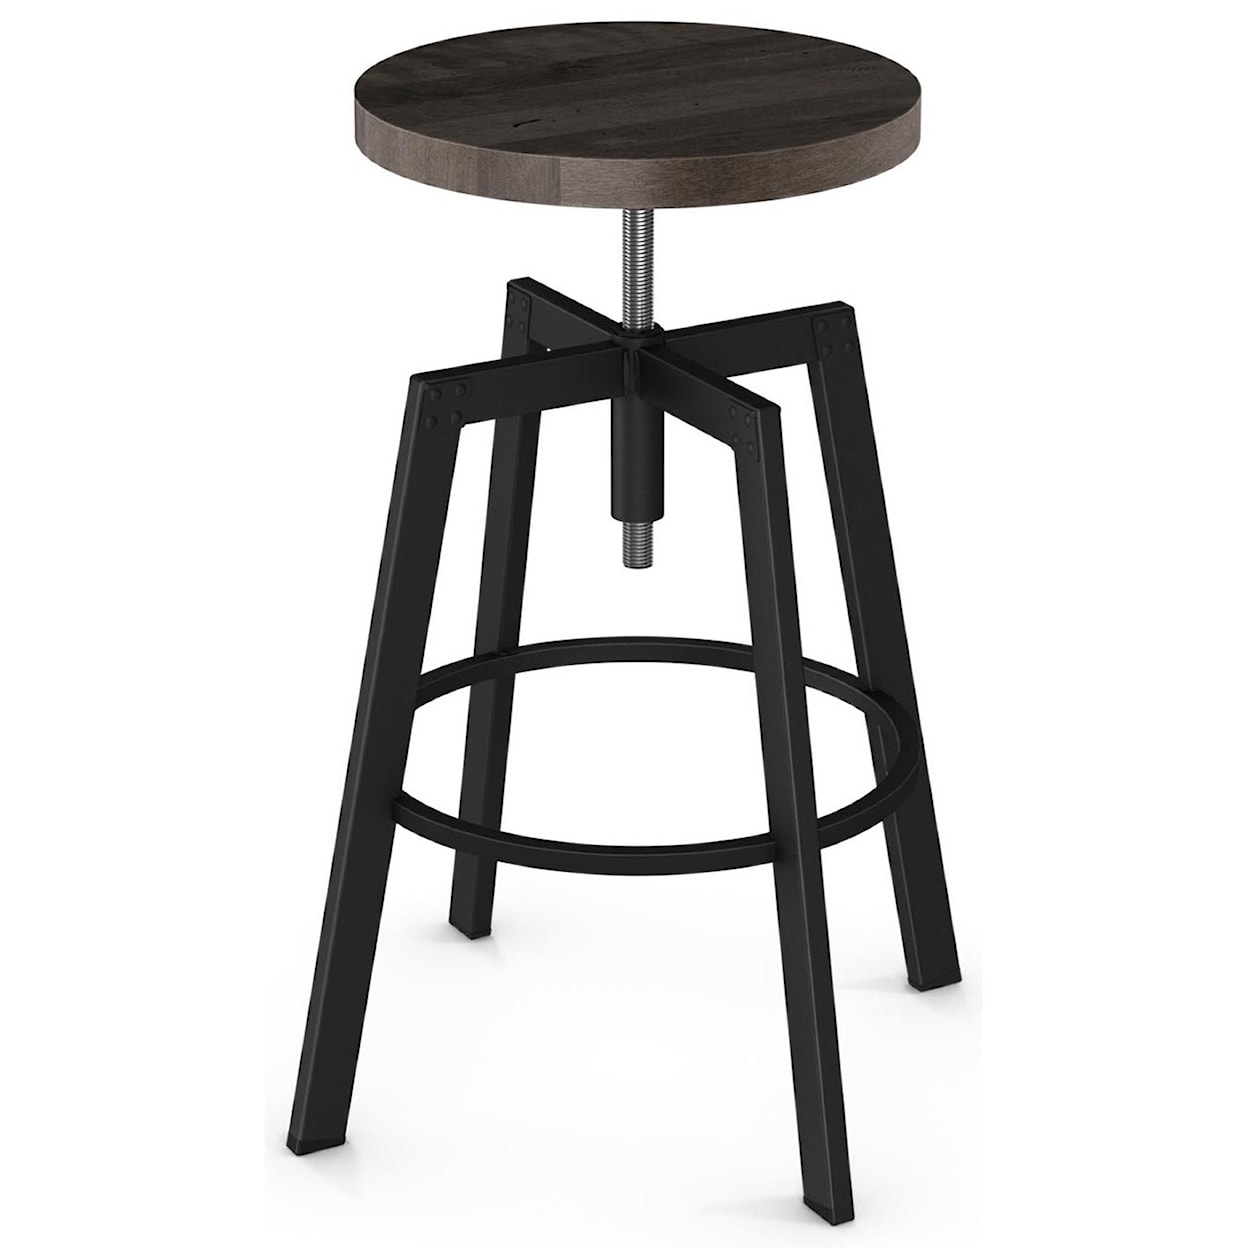 Amisco Industrial Architect Screw Stool with Wood Seat